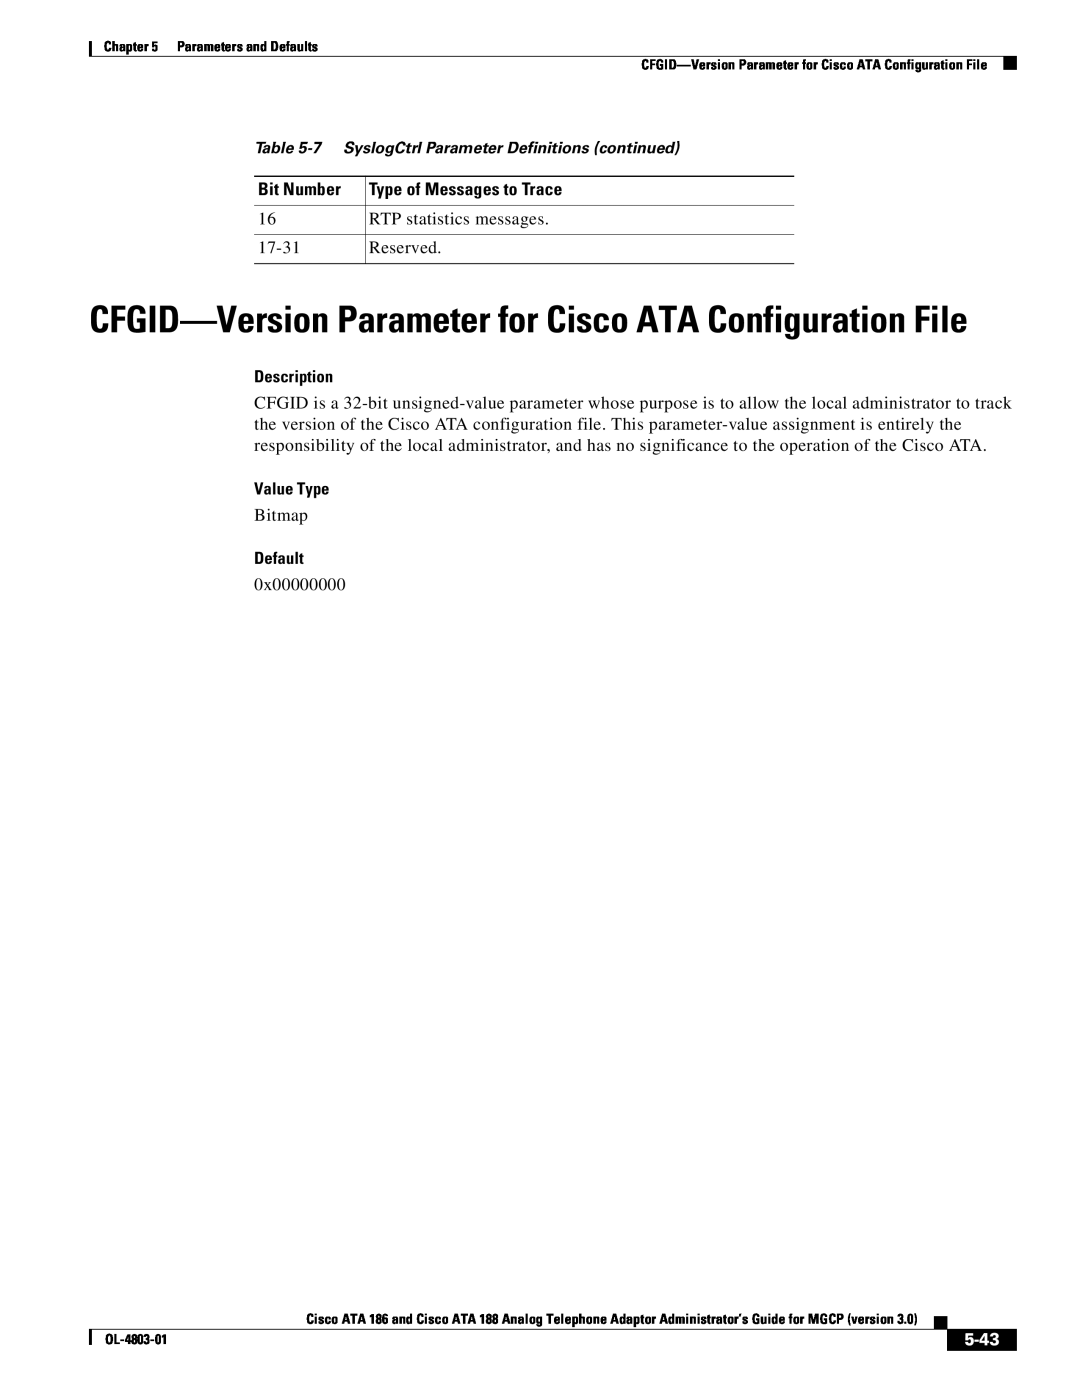 Cisco Systems ATA 188 CFGID-Version Parameter for Cisco ATA Configuration File, Bit Number Type of Messages to Trace, 5-43 